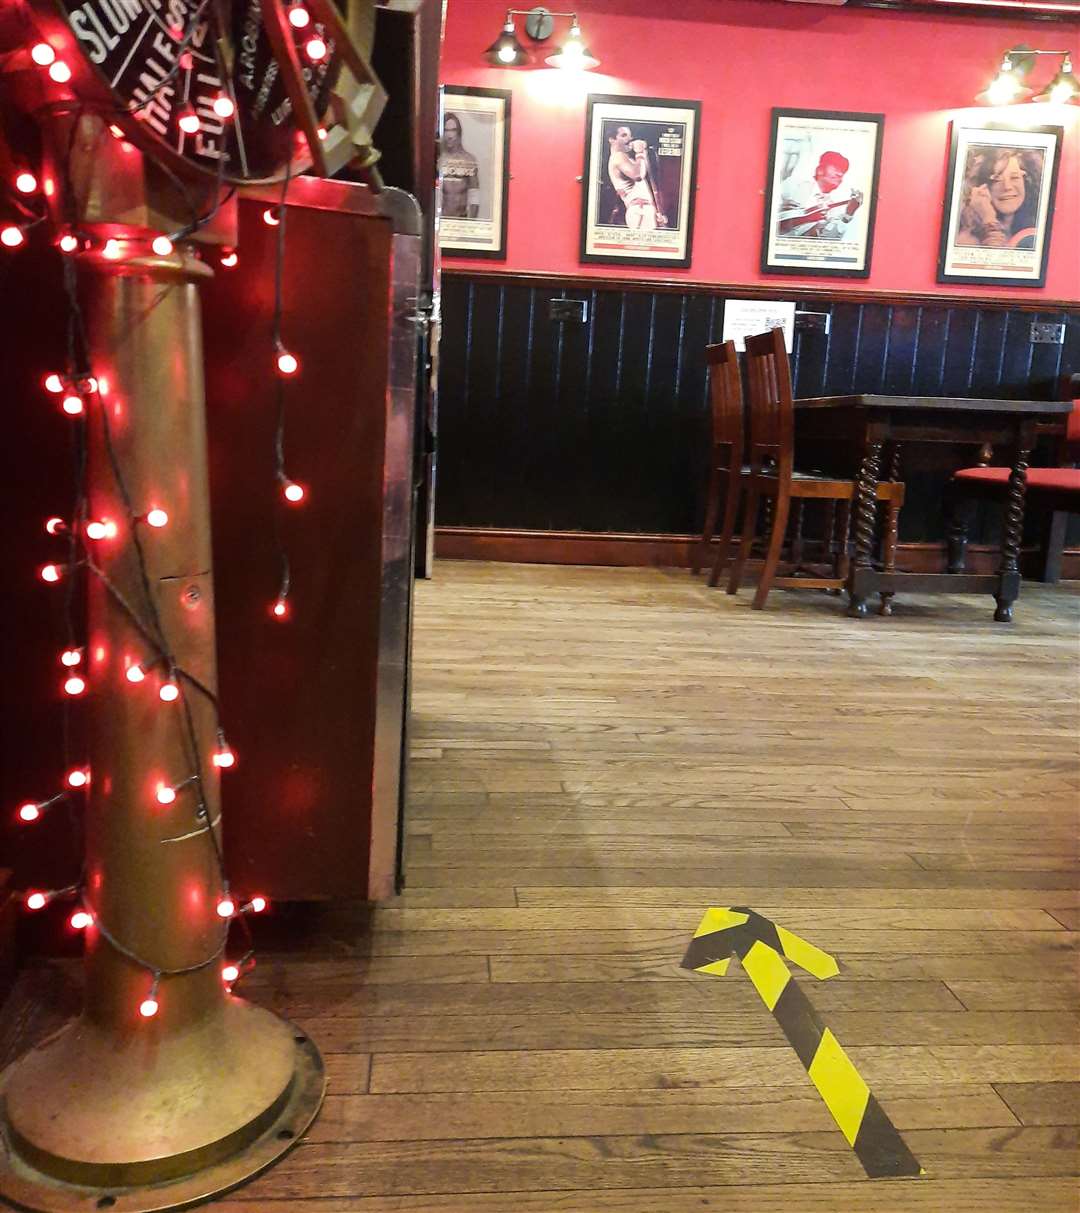 One of the many arrows taped to the floor of the Lady Luck